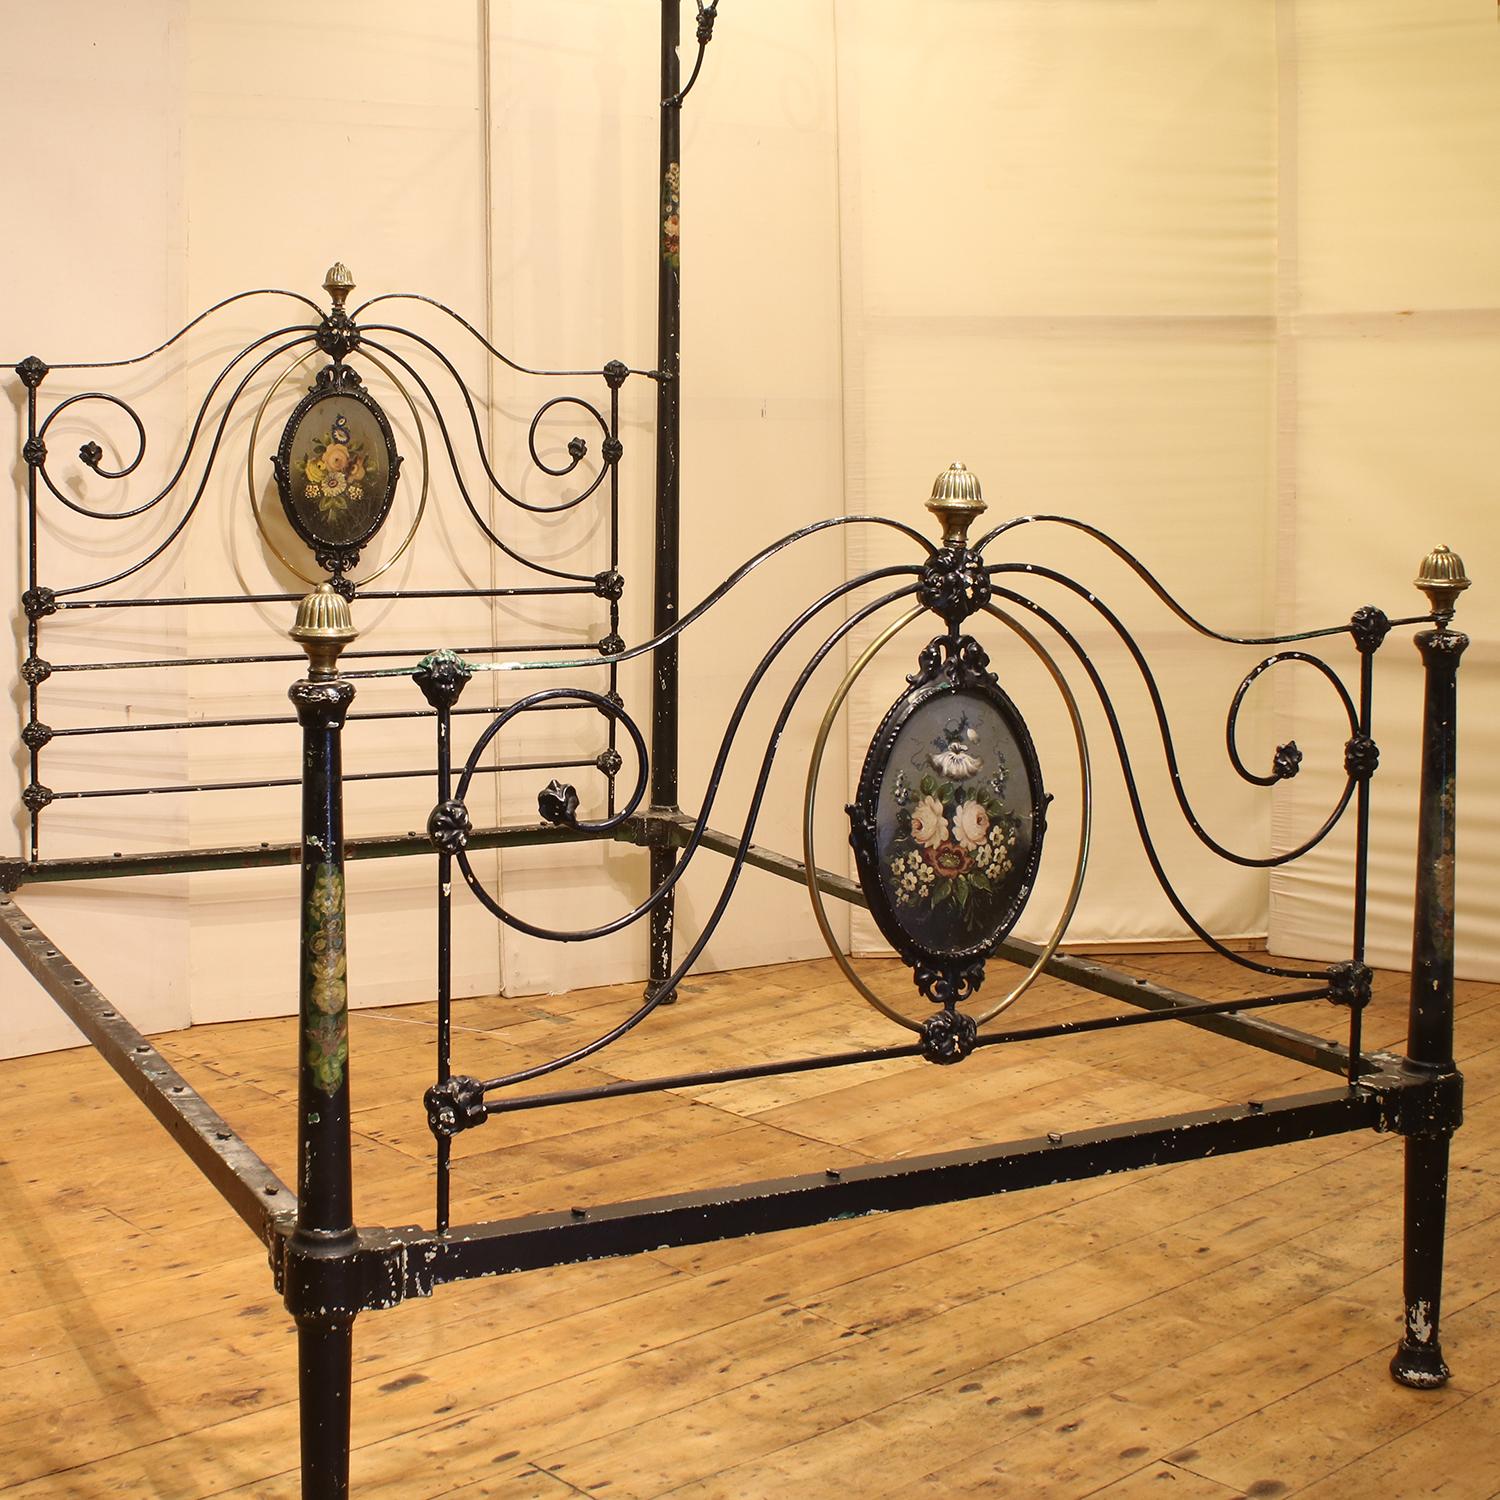 This superb original mid-Victorian cast iron half tester bed has the original floral painted central plaques and posts. The tall tapered posts on the back of the bed support an unusual 'hook' canopy, which would have supported drapes.
The black